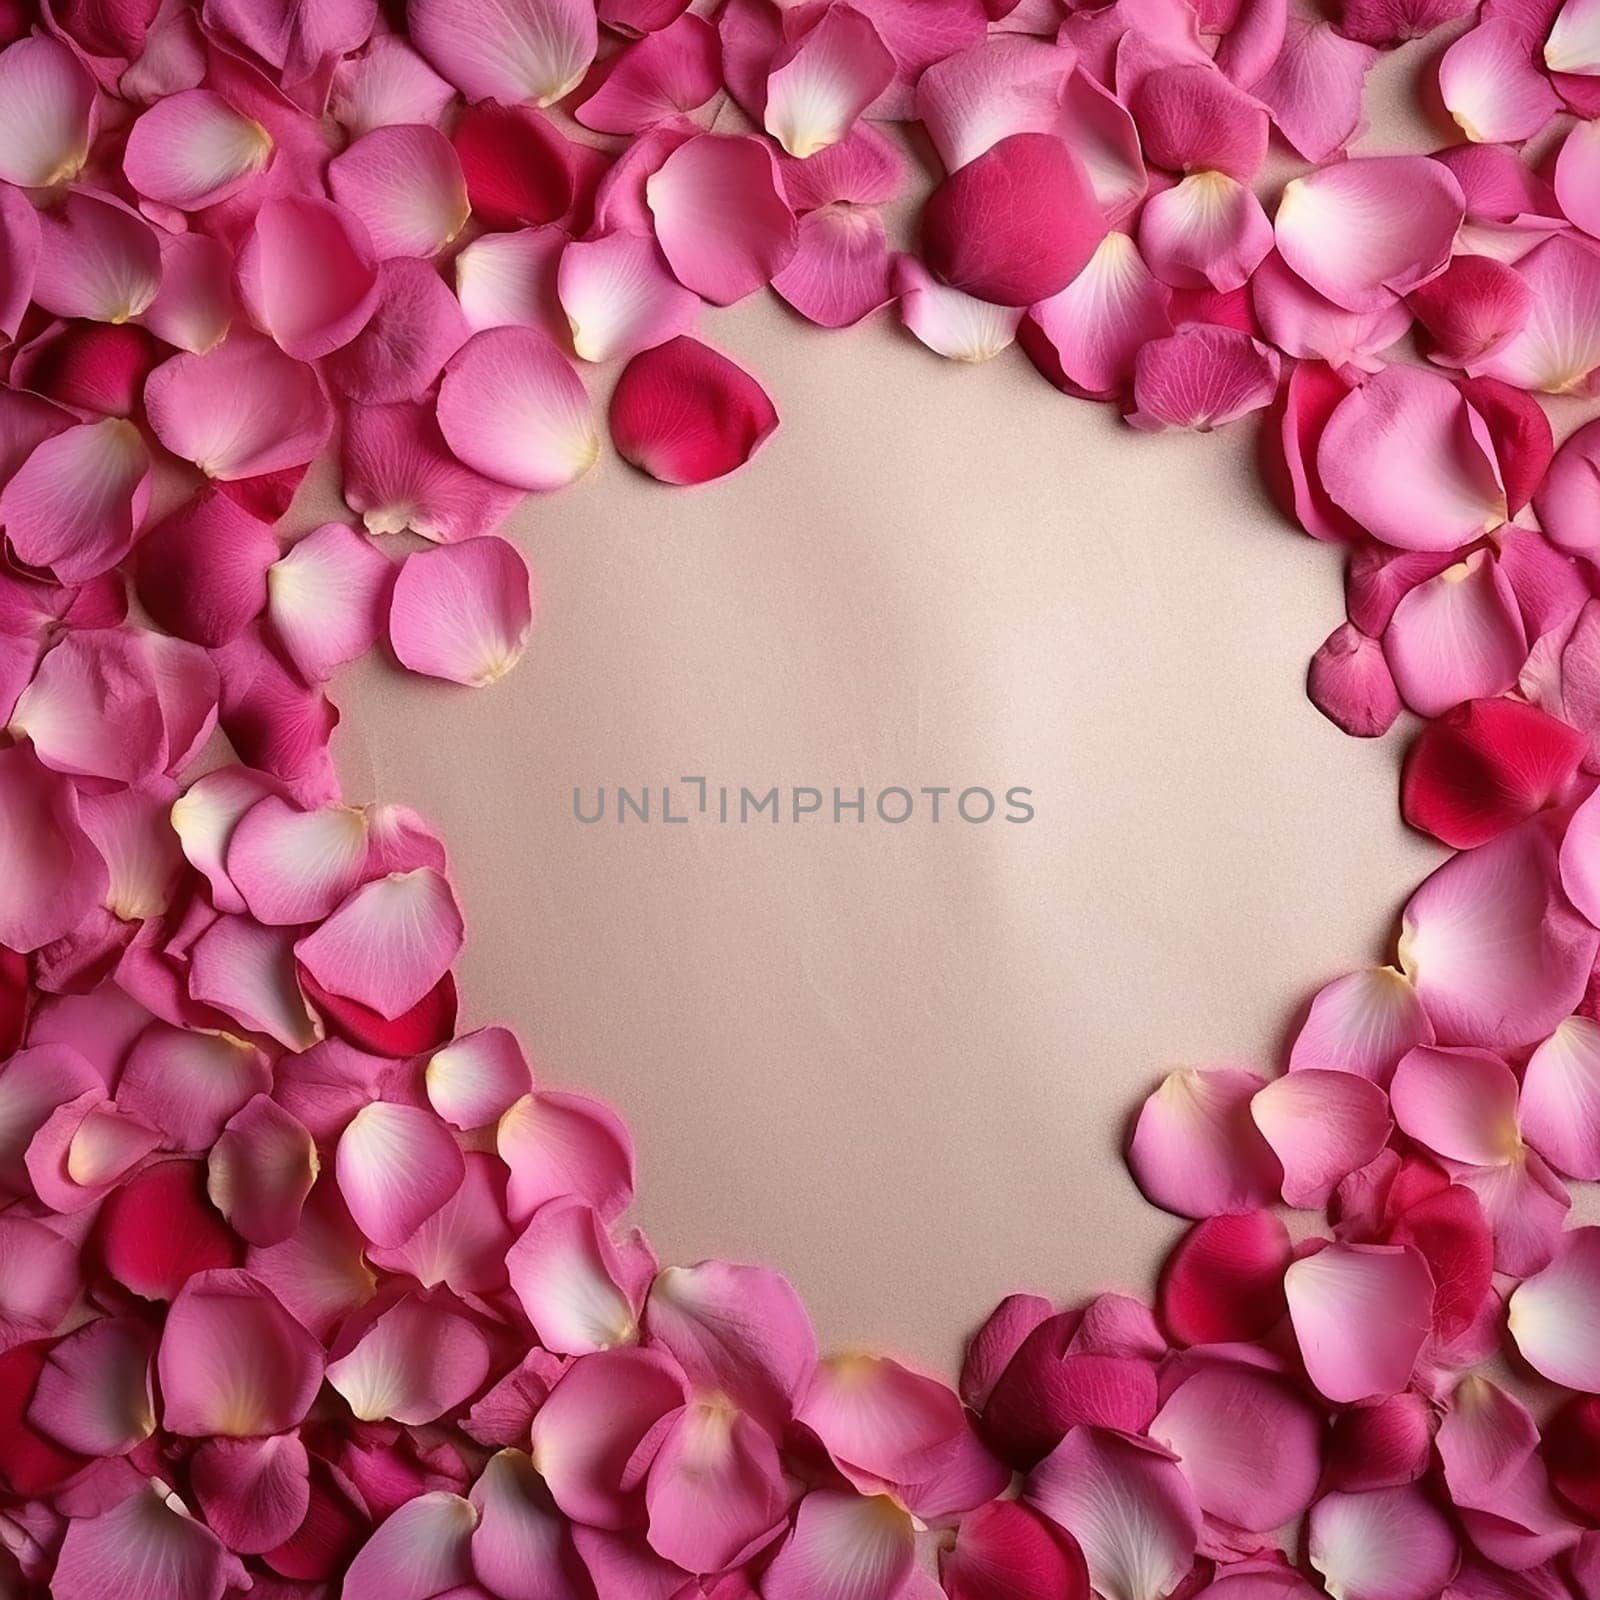 Assortment of pink rose petals forming a border on a beige background. by Hype2art